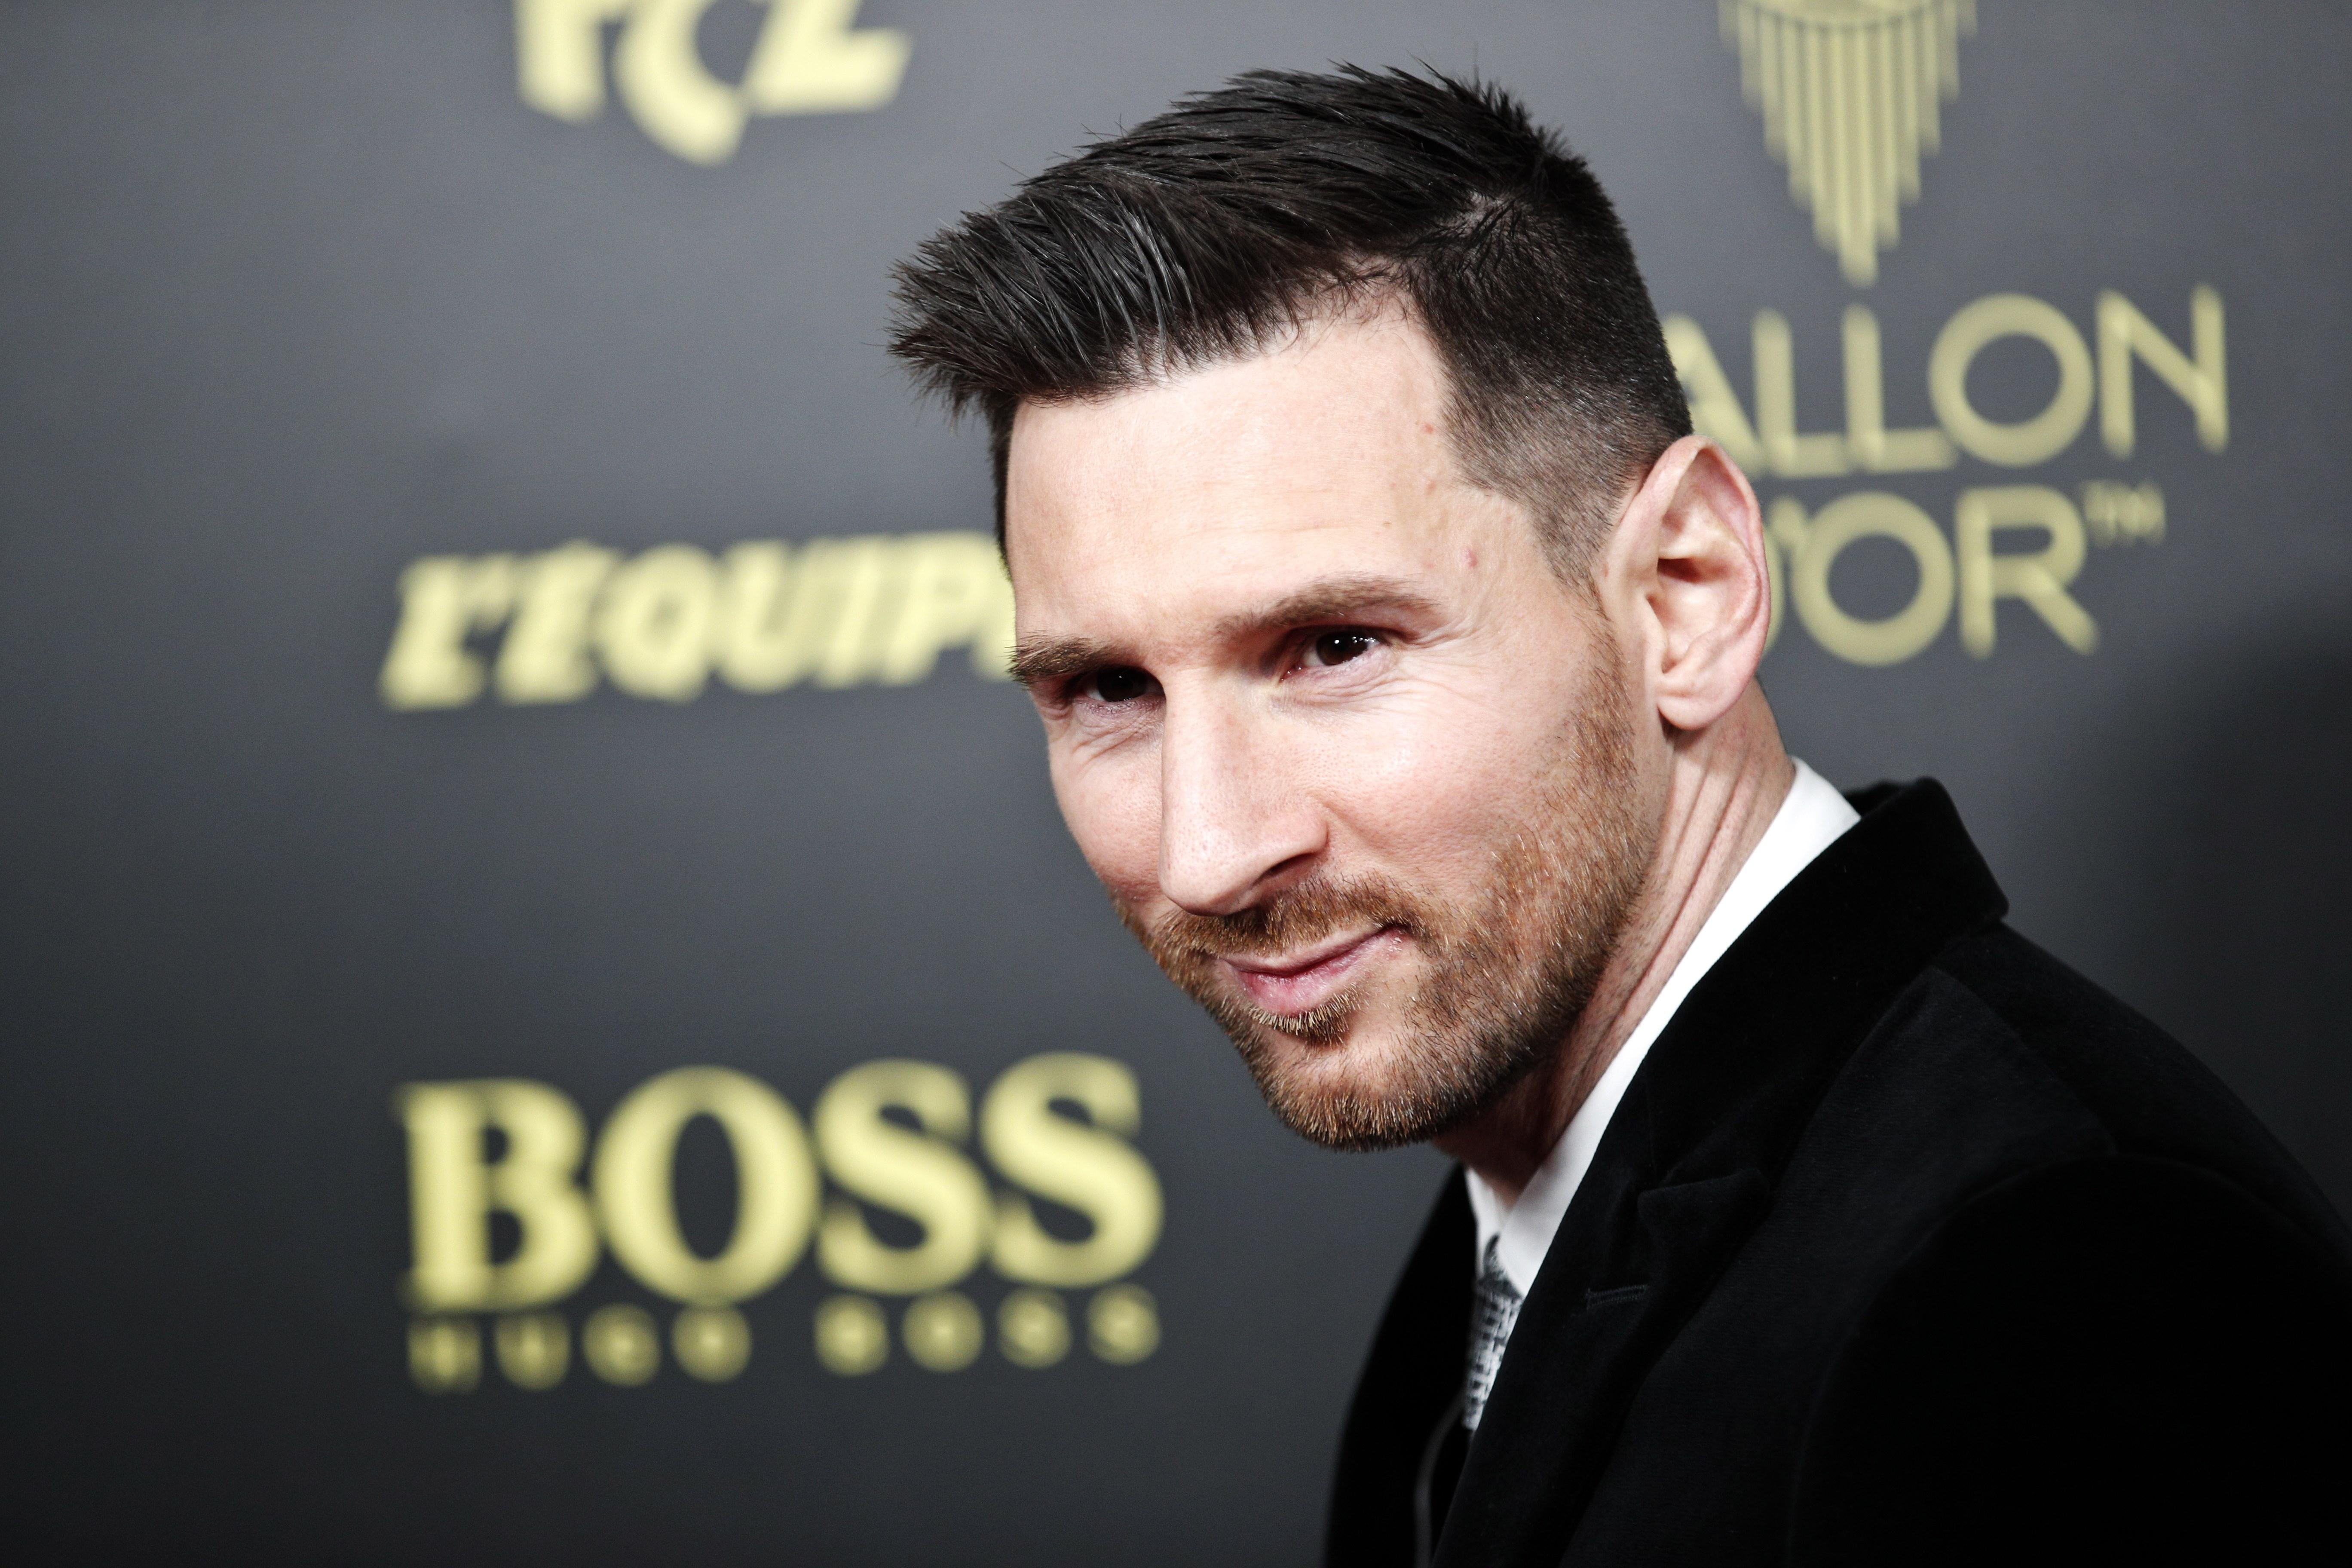 Messi makes history with sixth Ballon d'Or